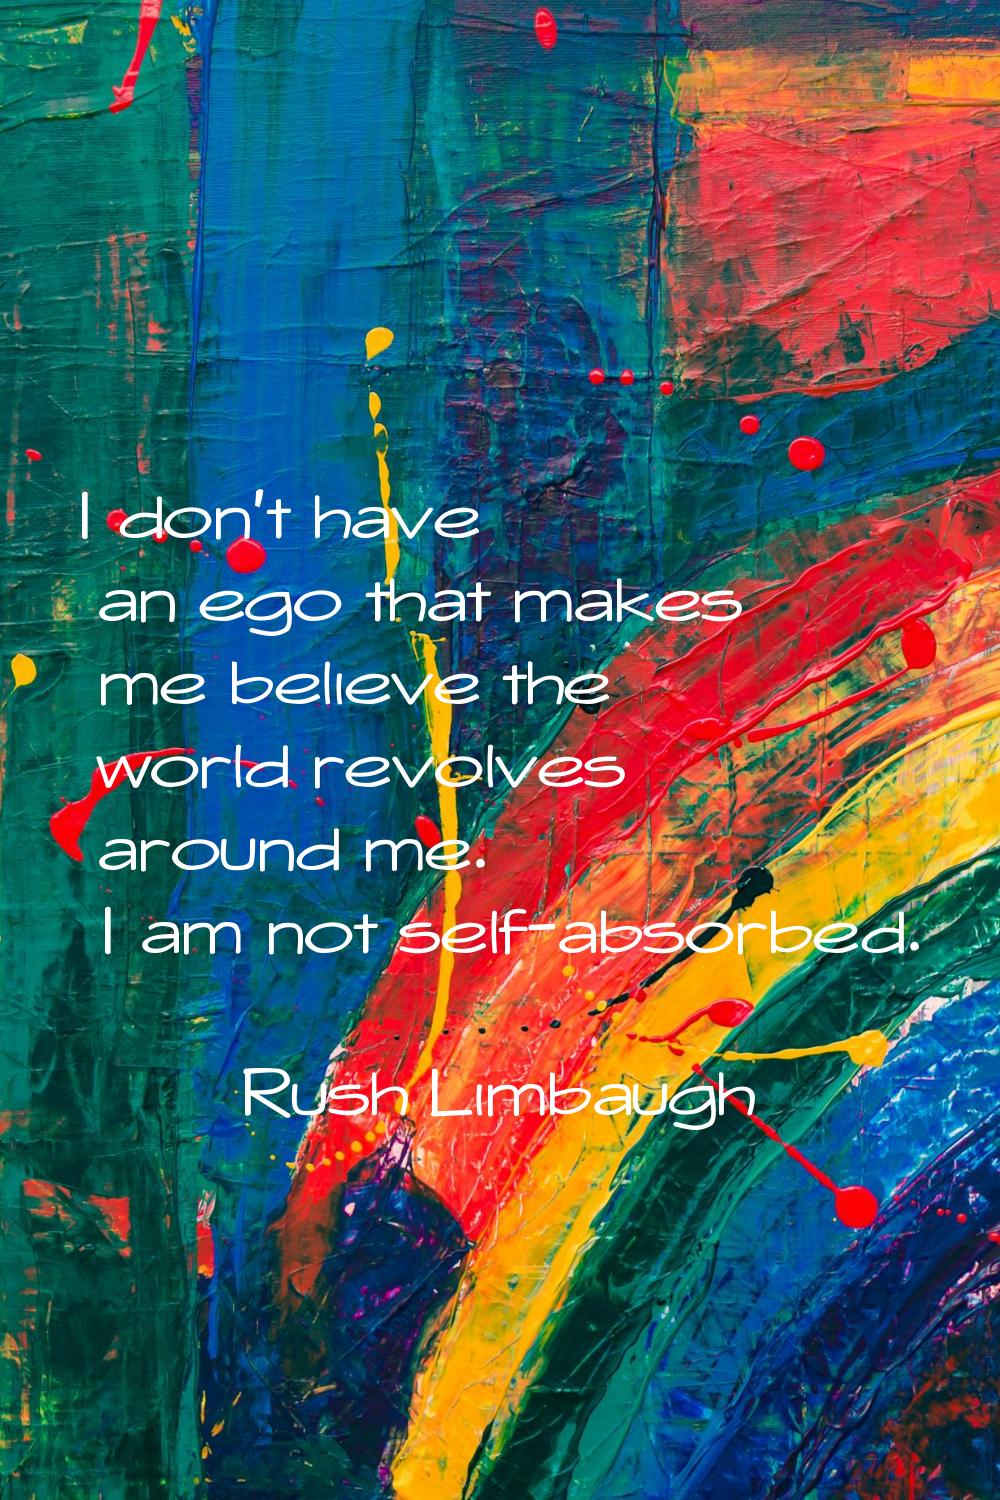 I don't have an ego that makes me believe the world revolves around me. I am not self-absorbed.